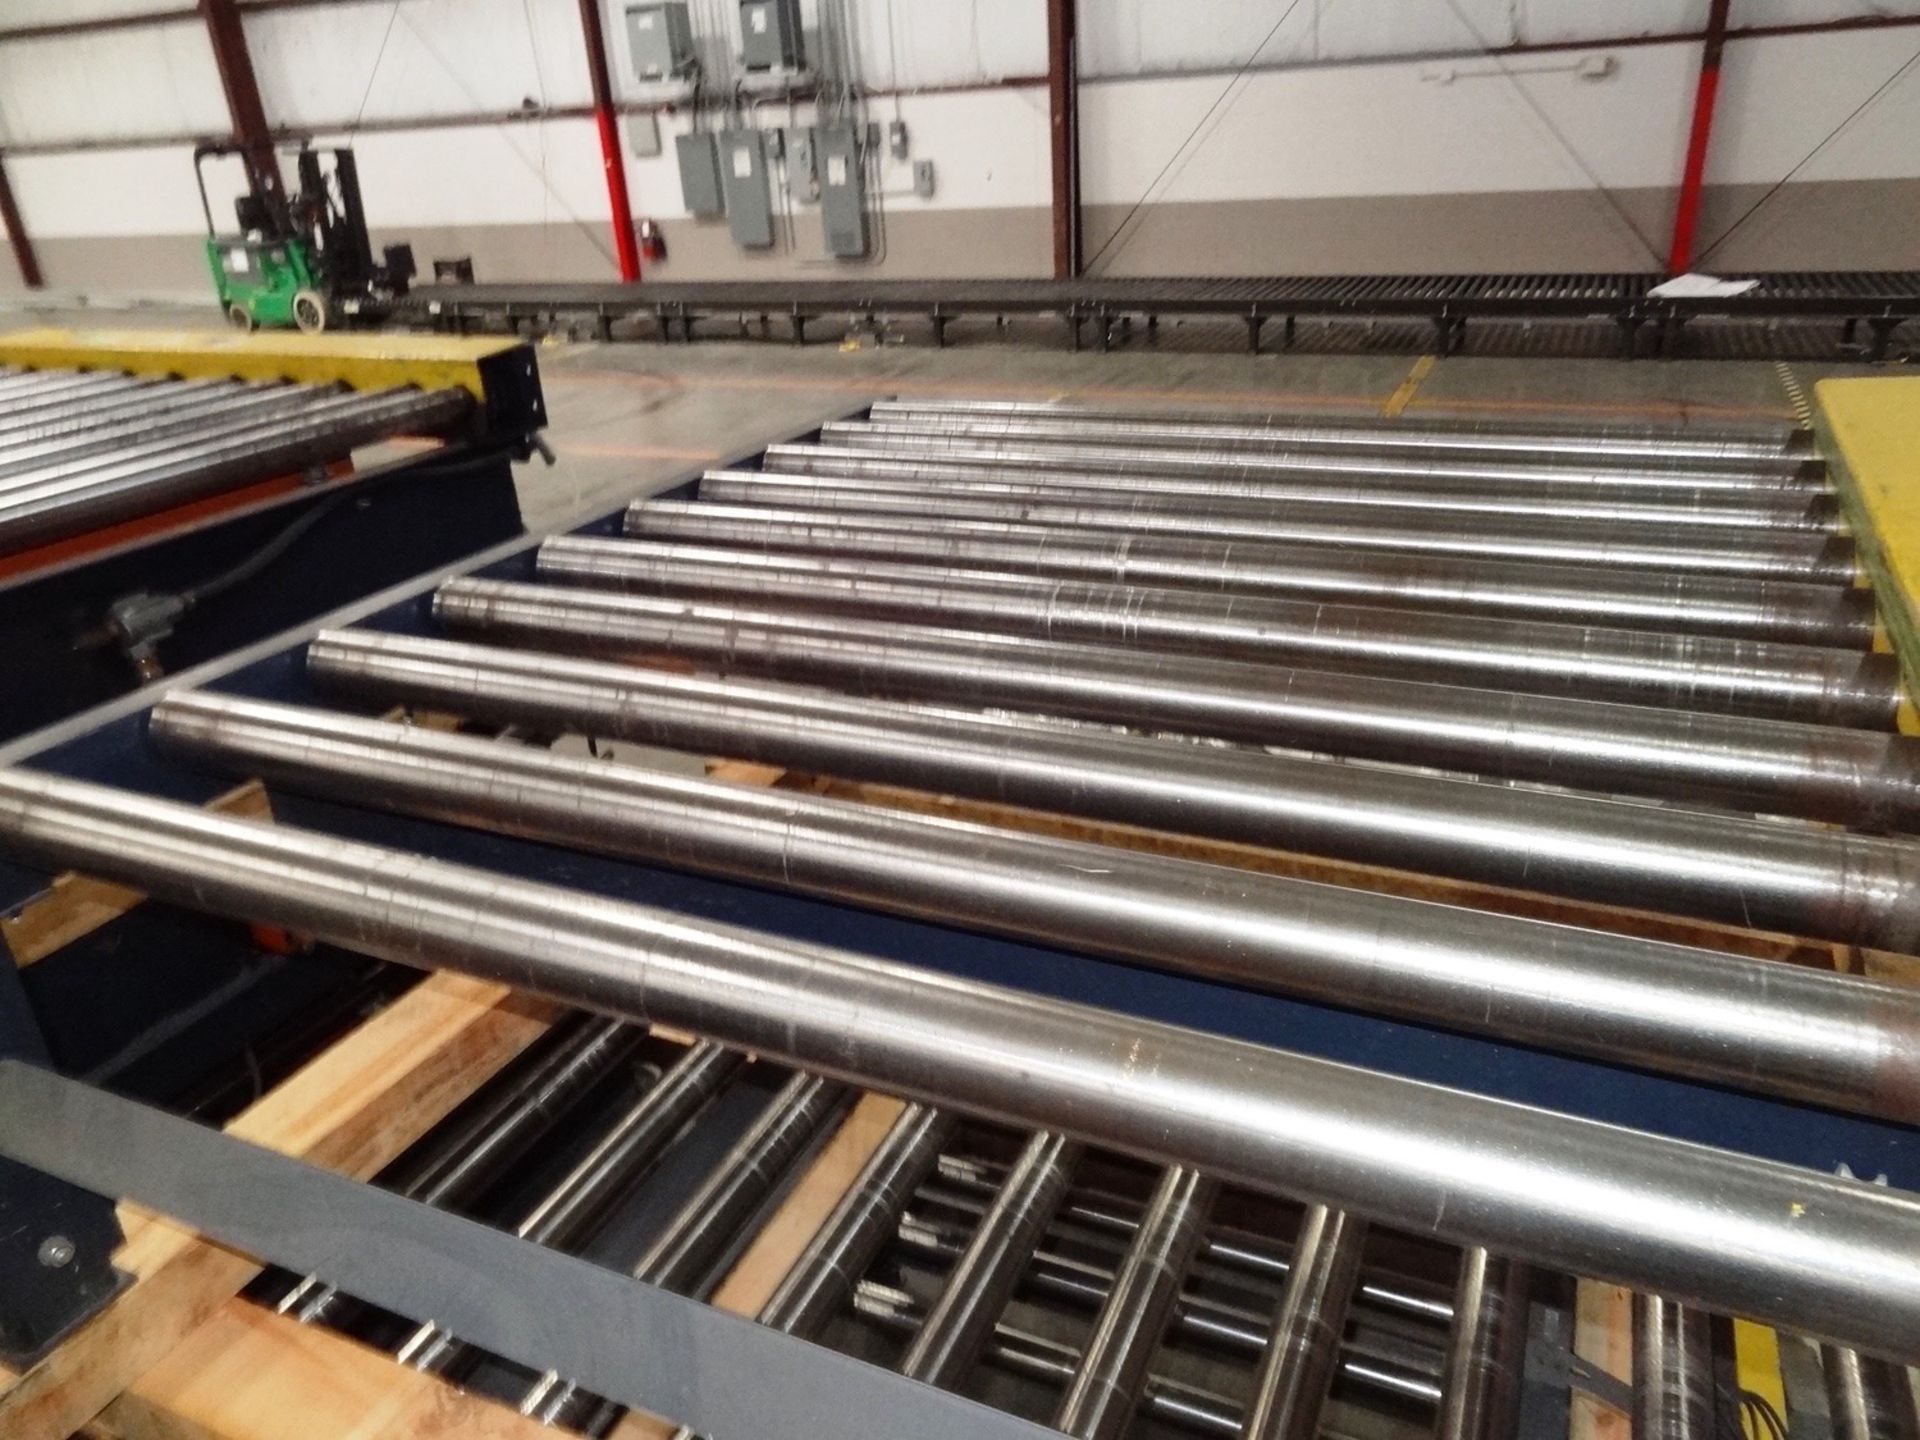 Pallet Conveyor System - 250' Total - Image 3 of 4